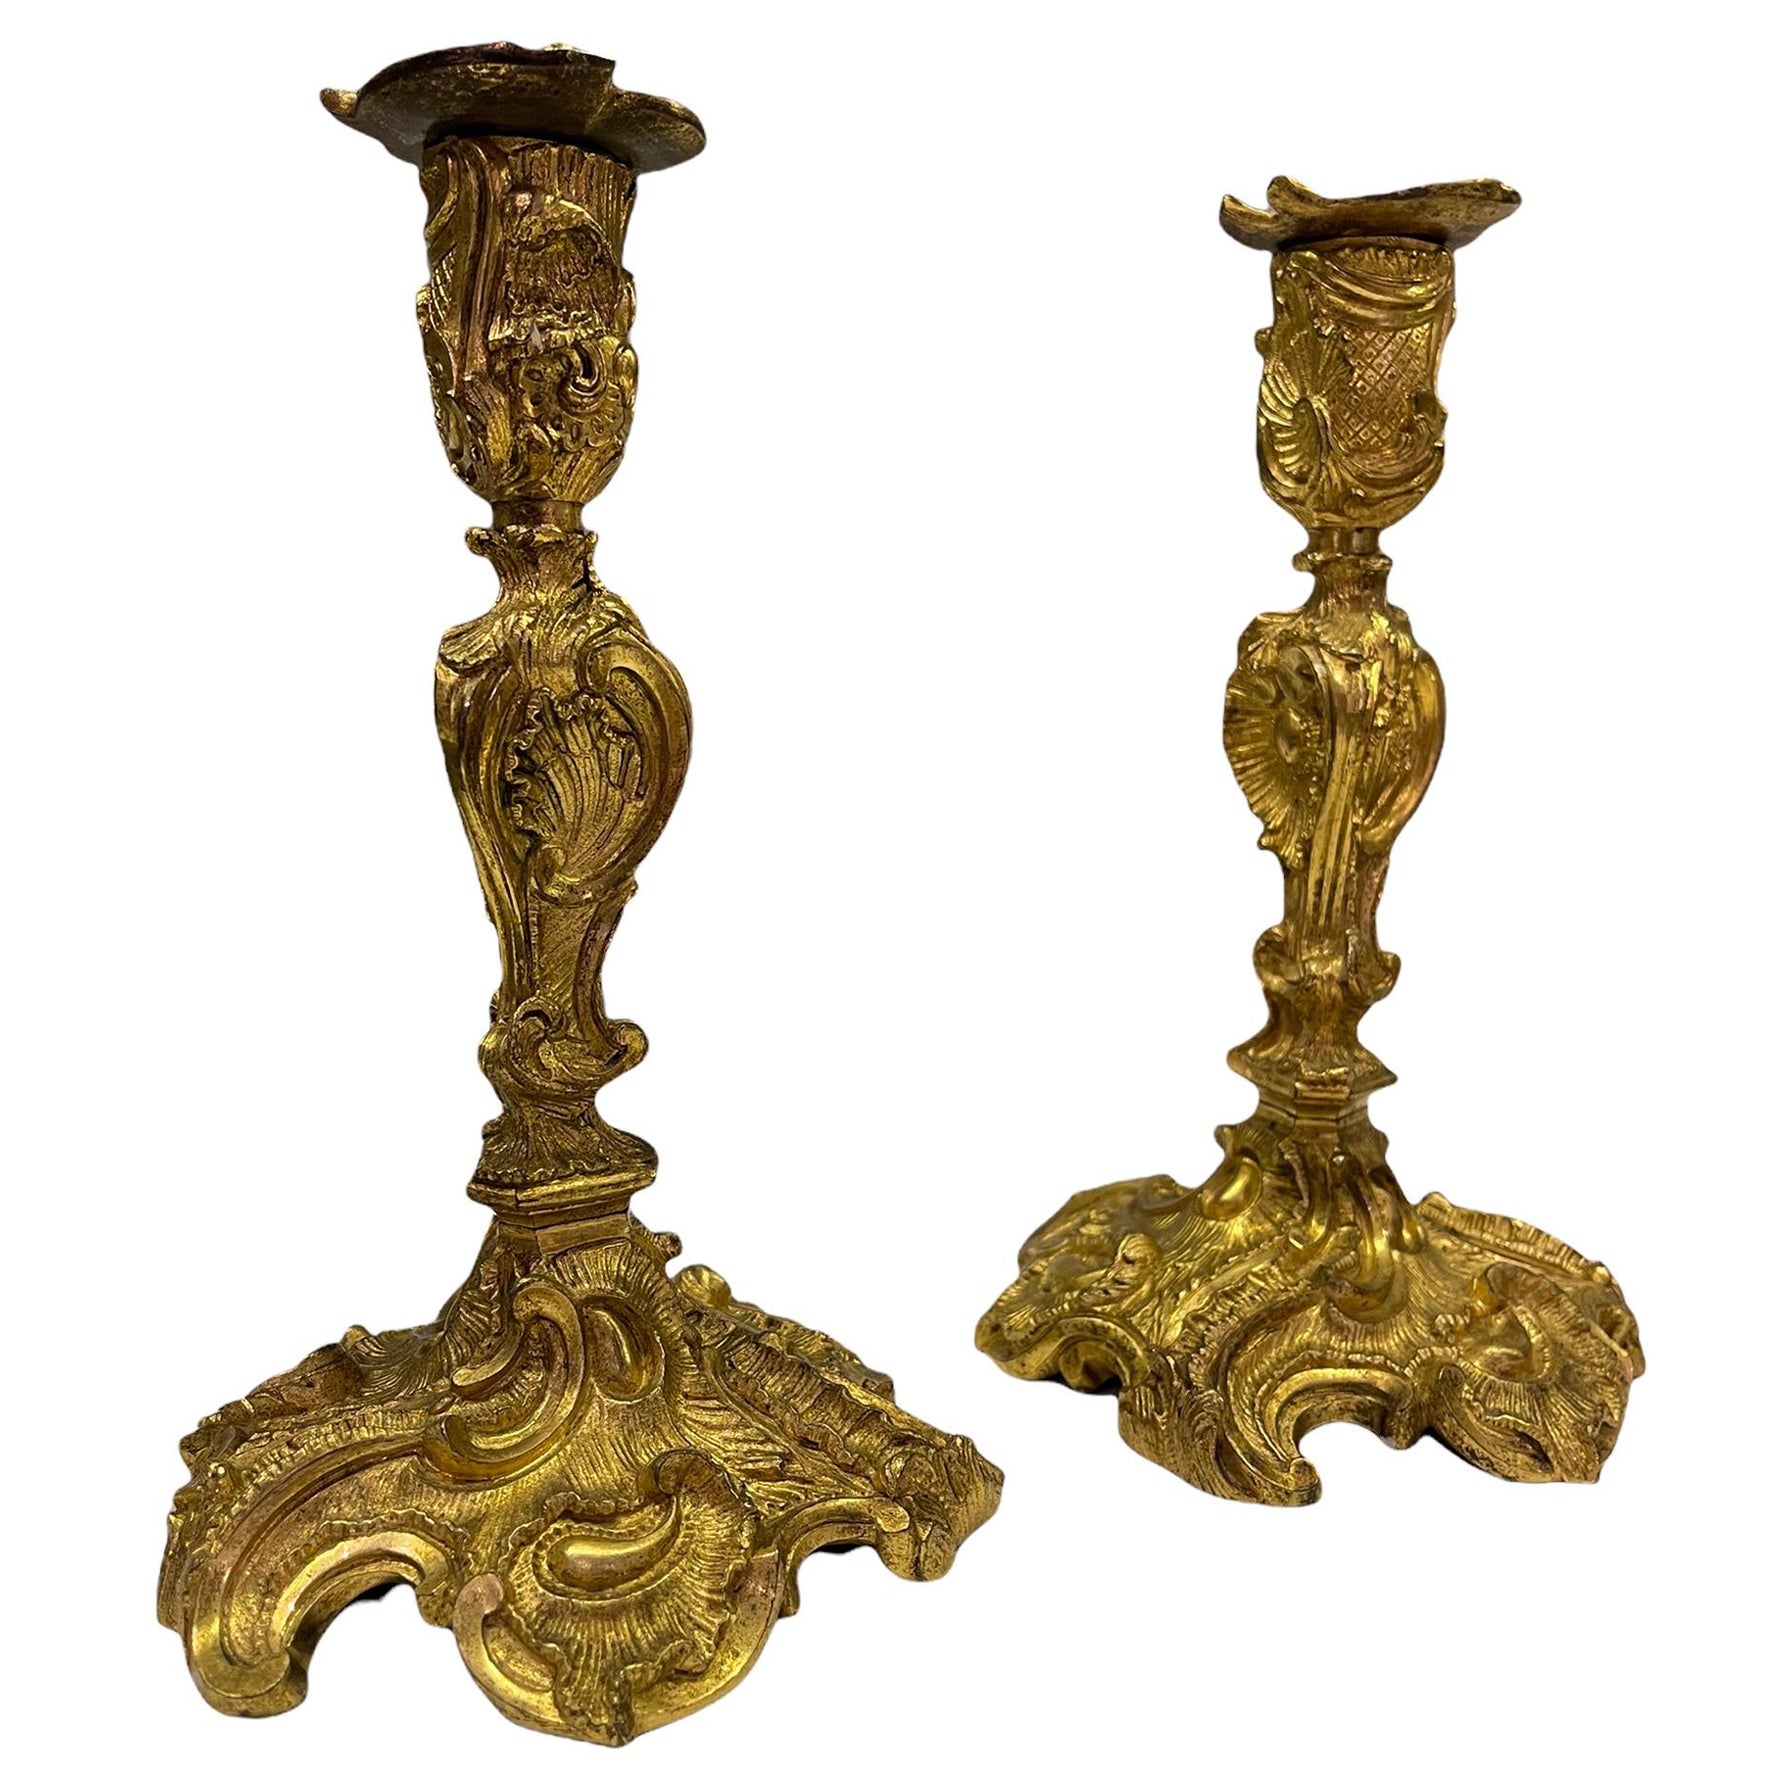 A Pair of French 18th Century Bronze Gold Gilt Candlesticks